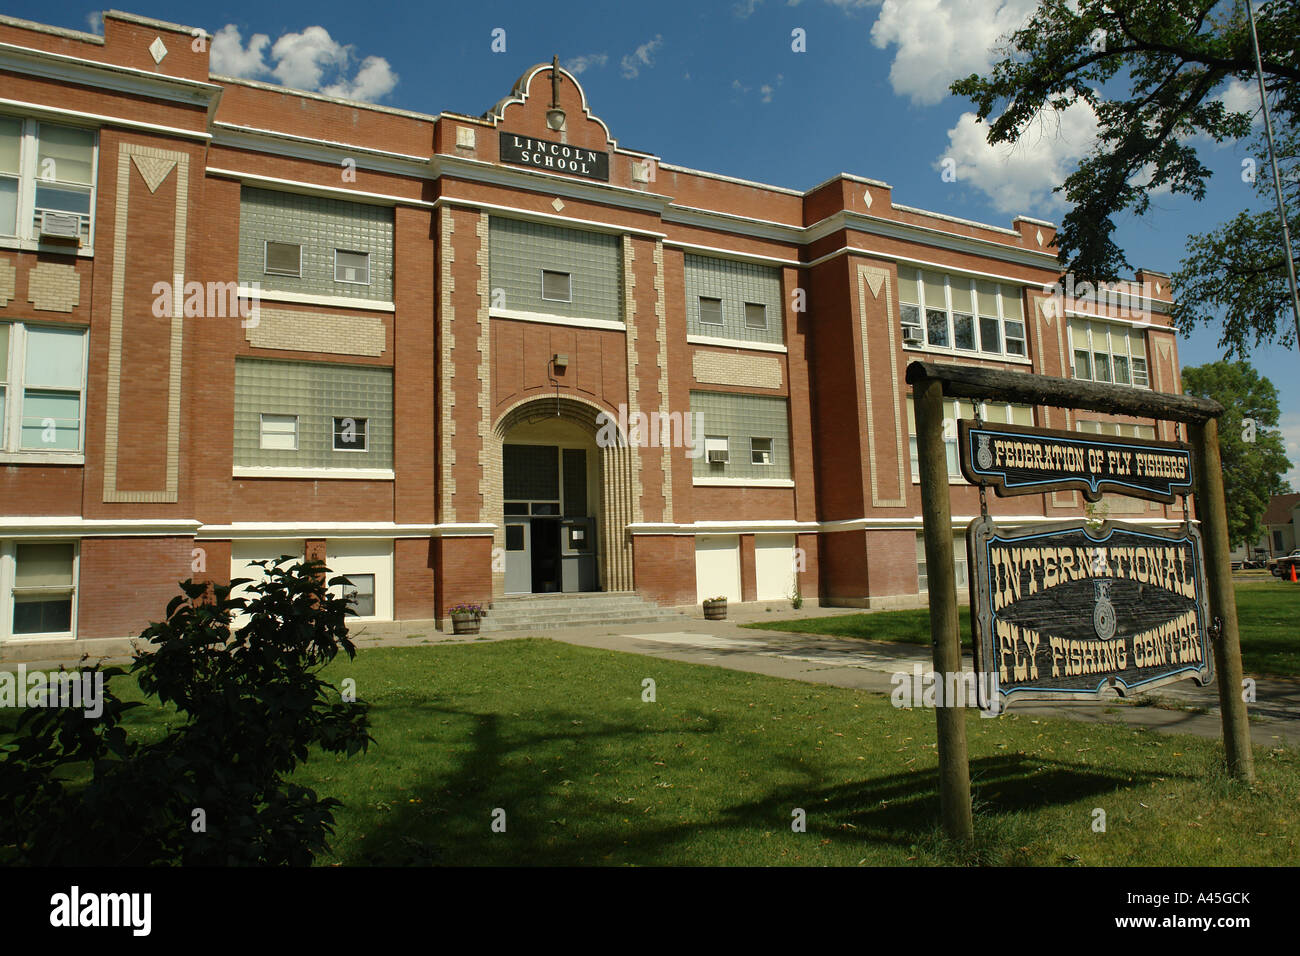 AJD57076, Livingston, MT, Montana, International Fly Fishing Center,  Lincoln School, Federation of Fly Fishers' Stock Photo - Alamy